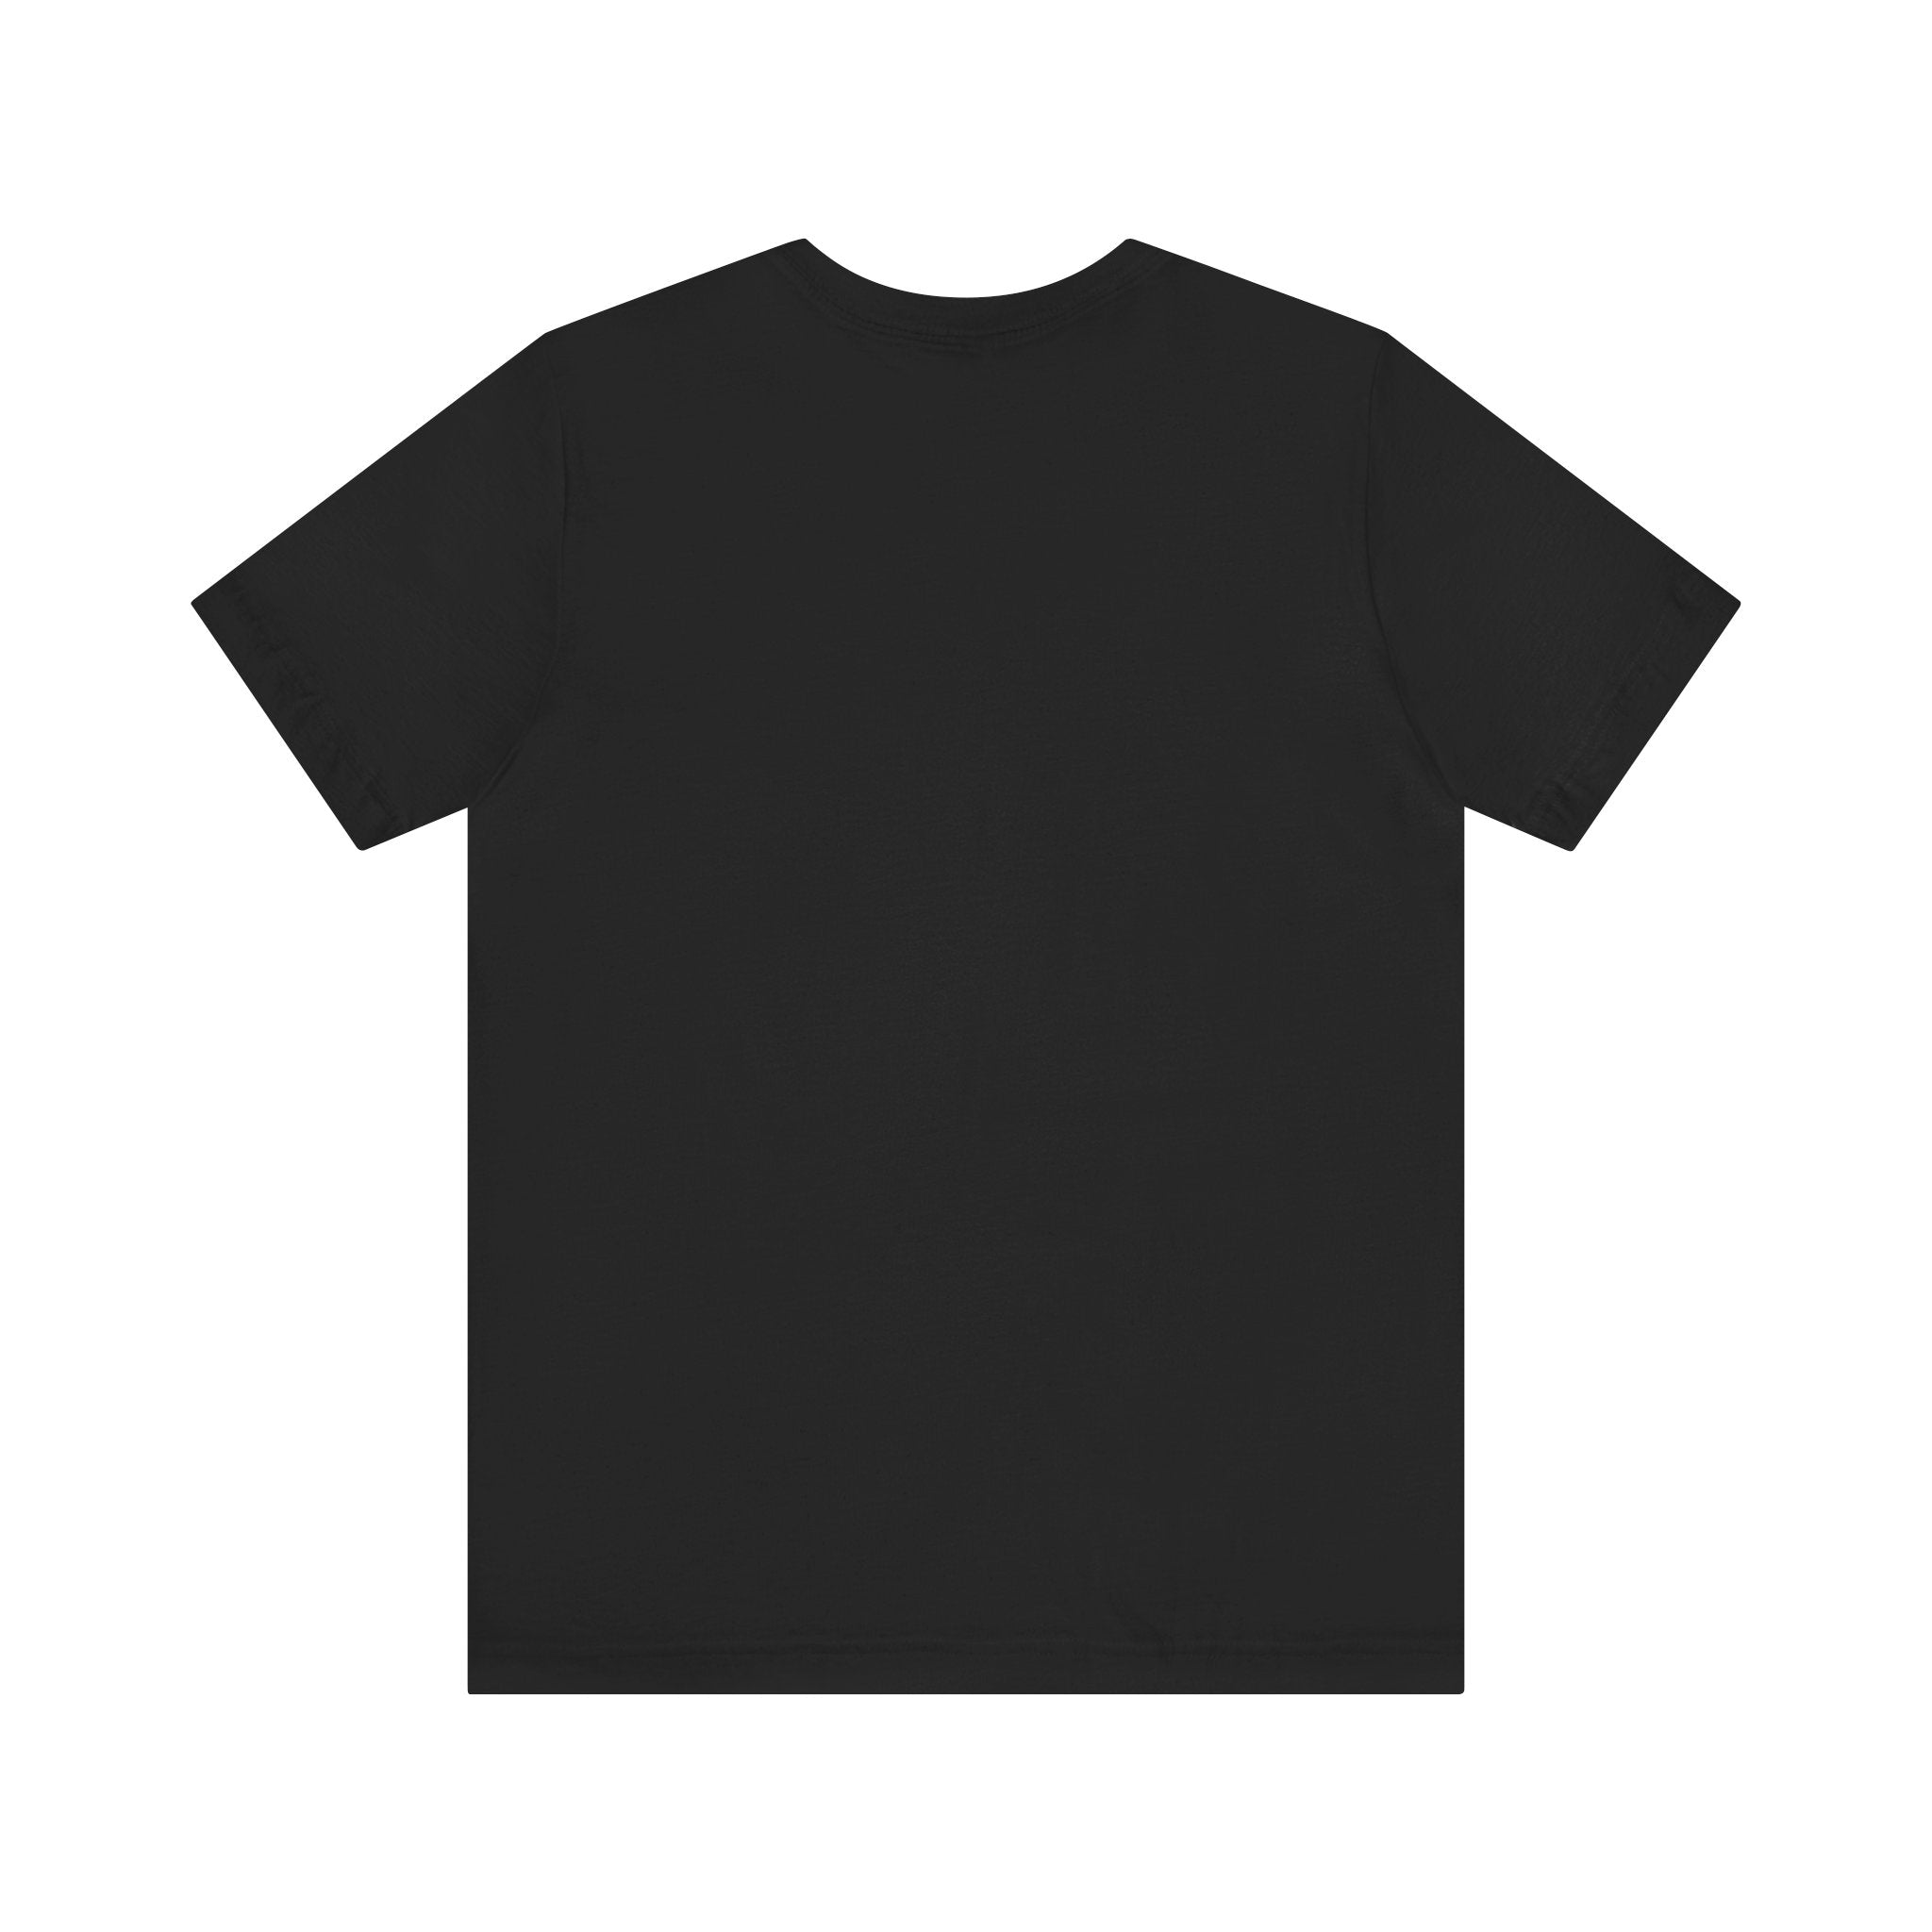 The image shows the back of a plain black Binary Rain Cloud - T-Shirt made from Airlume combed, ring-spun cotton, against a white background.